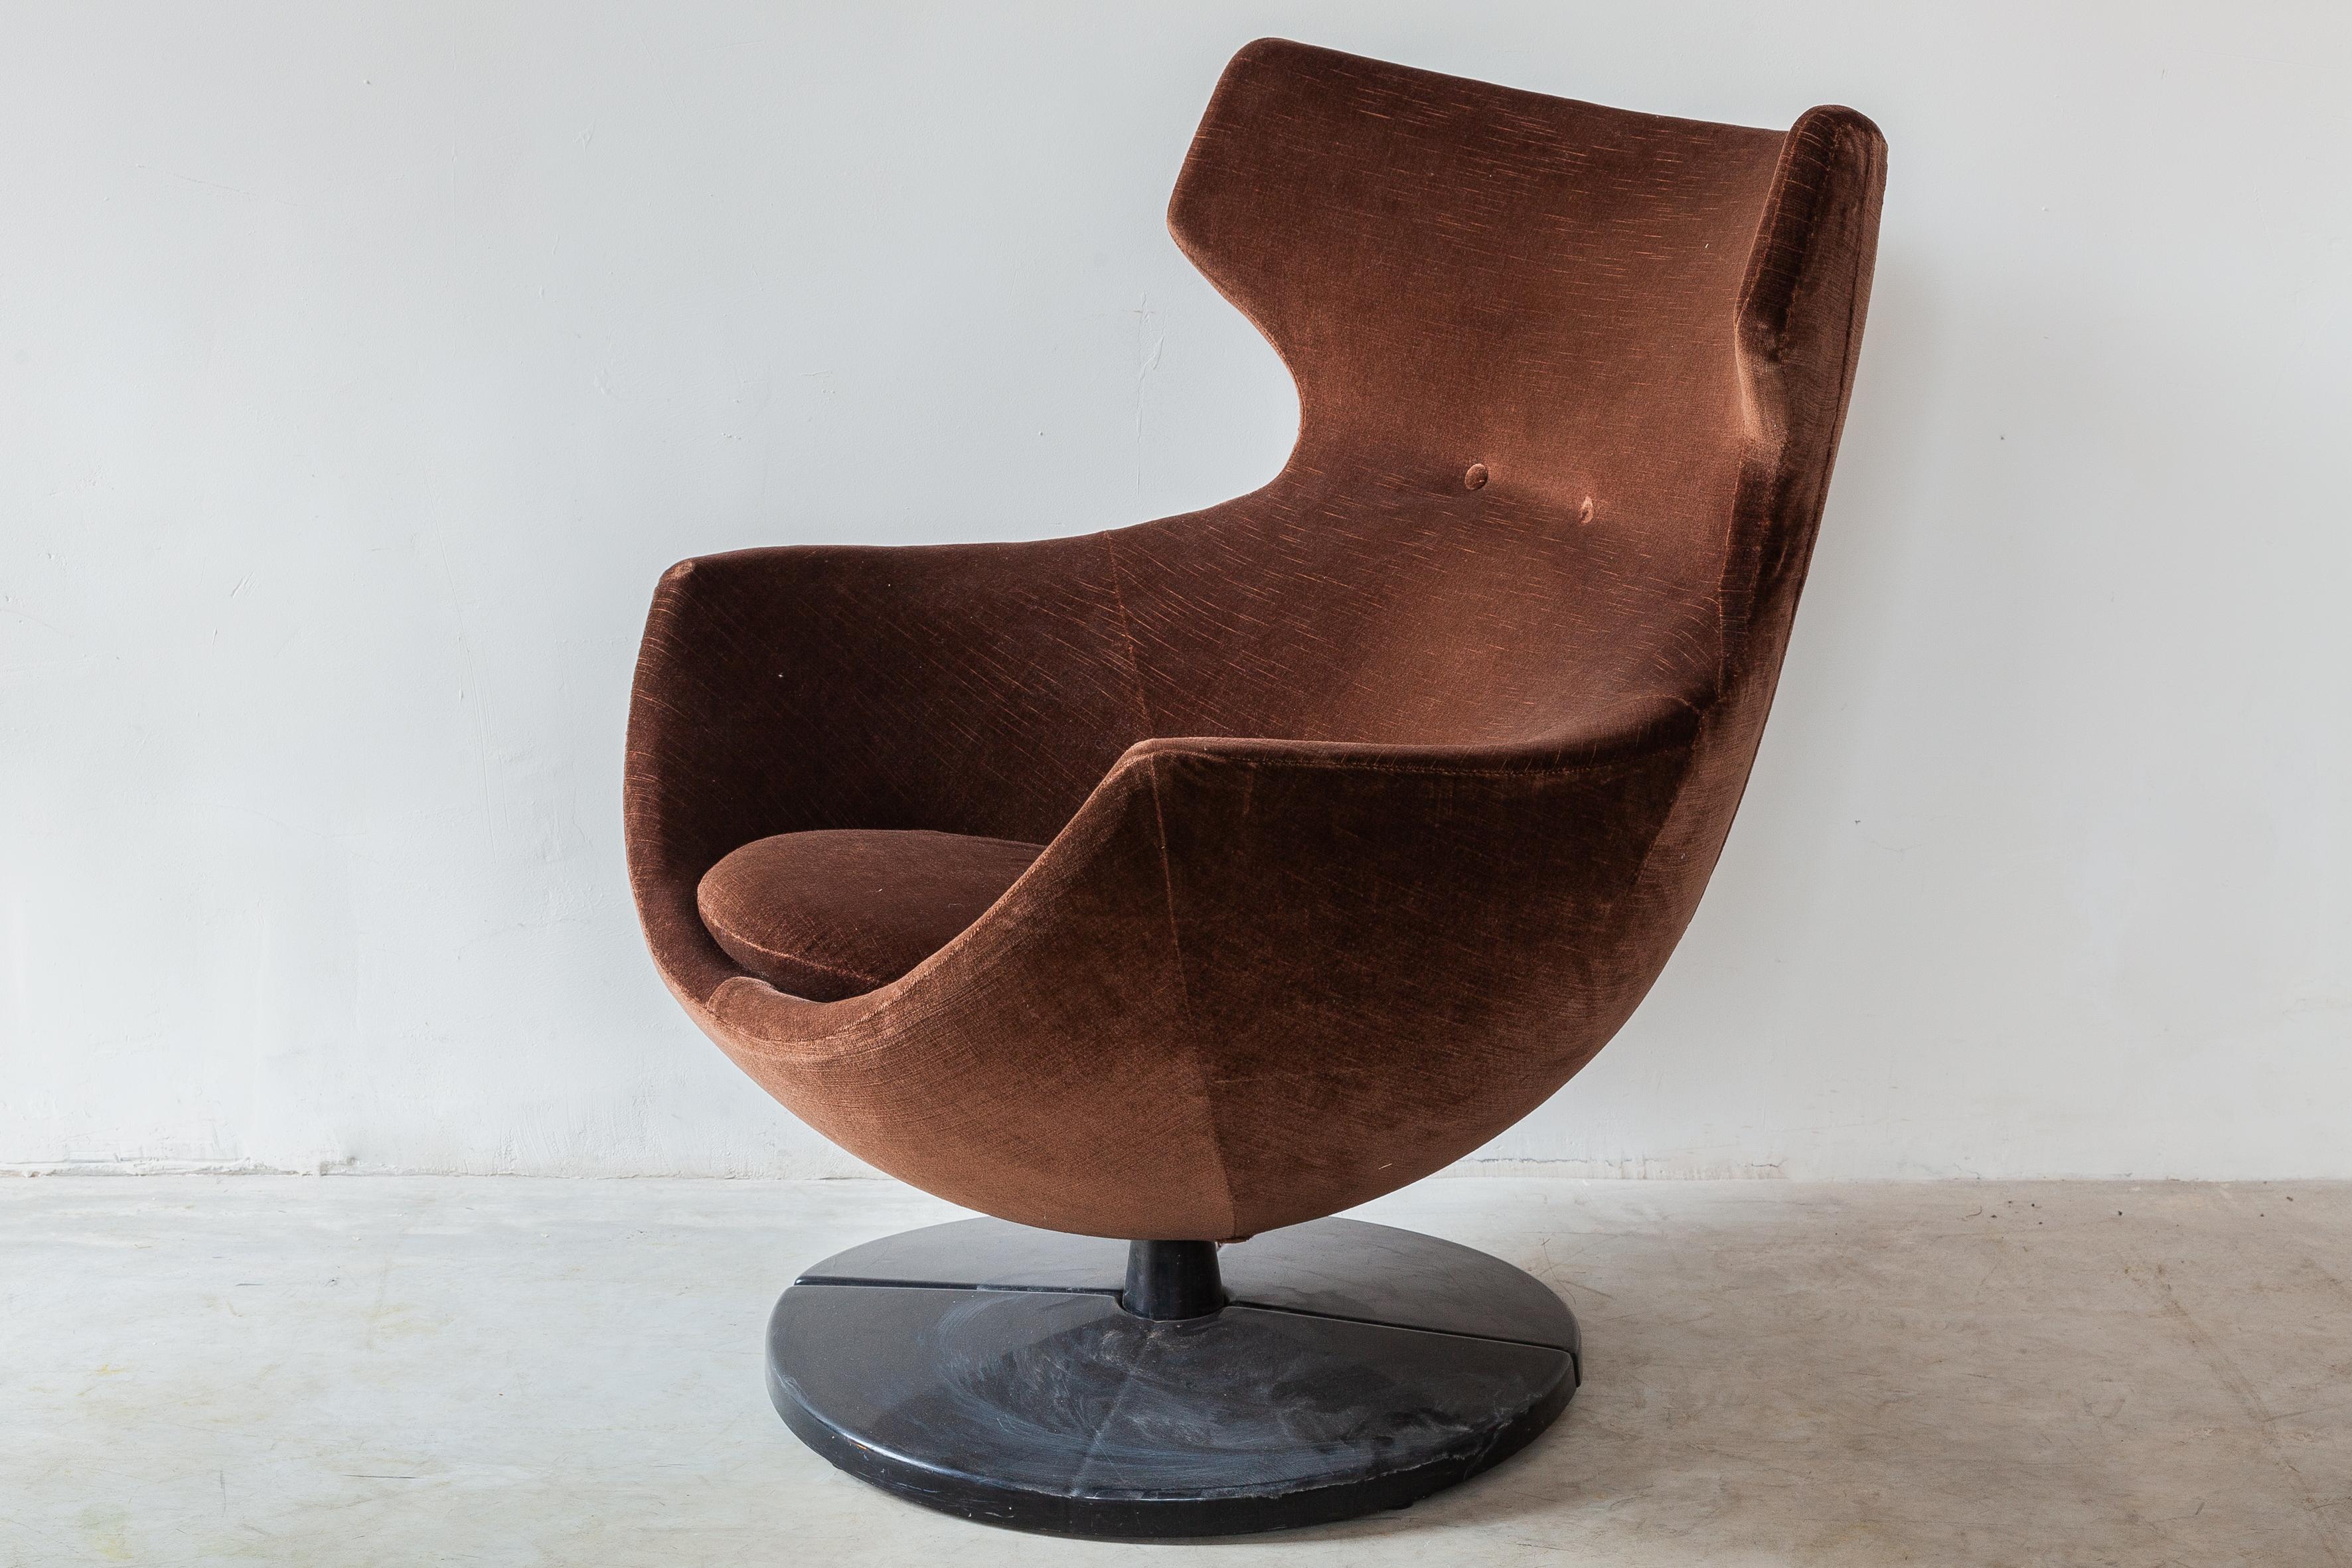 Vintage “Jupiter” lounge chair special version of this lounge chair designed by the Frenchman Pierre Guariche performed by Meurop, Belgium. Brown velveteen renewed upholstery in excellent condition. Bucket style seat with a black swivel base.